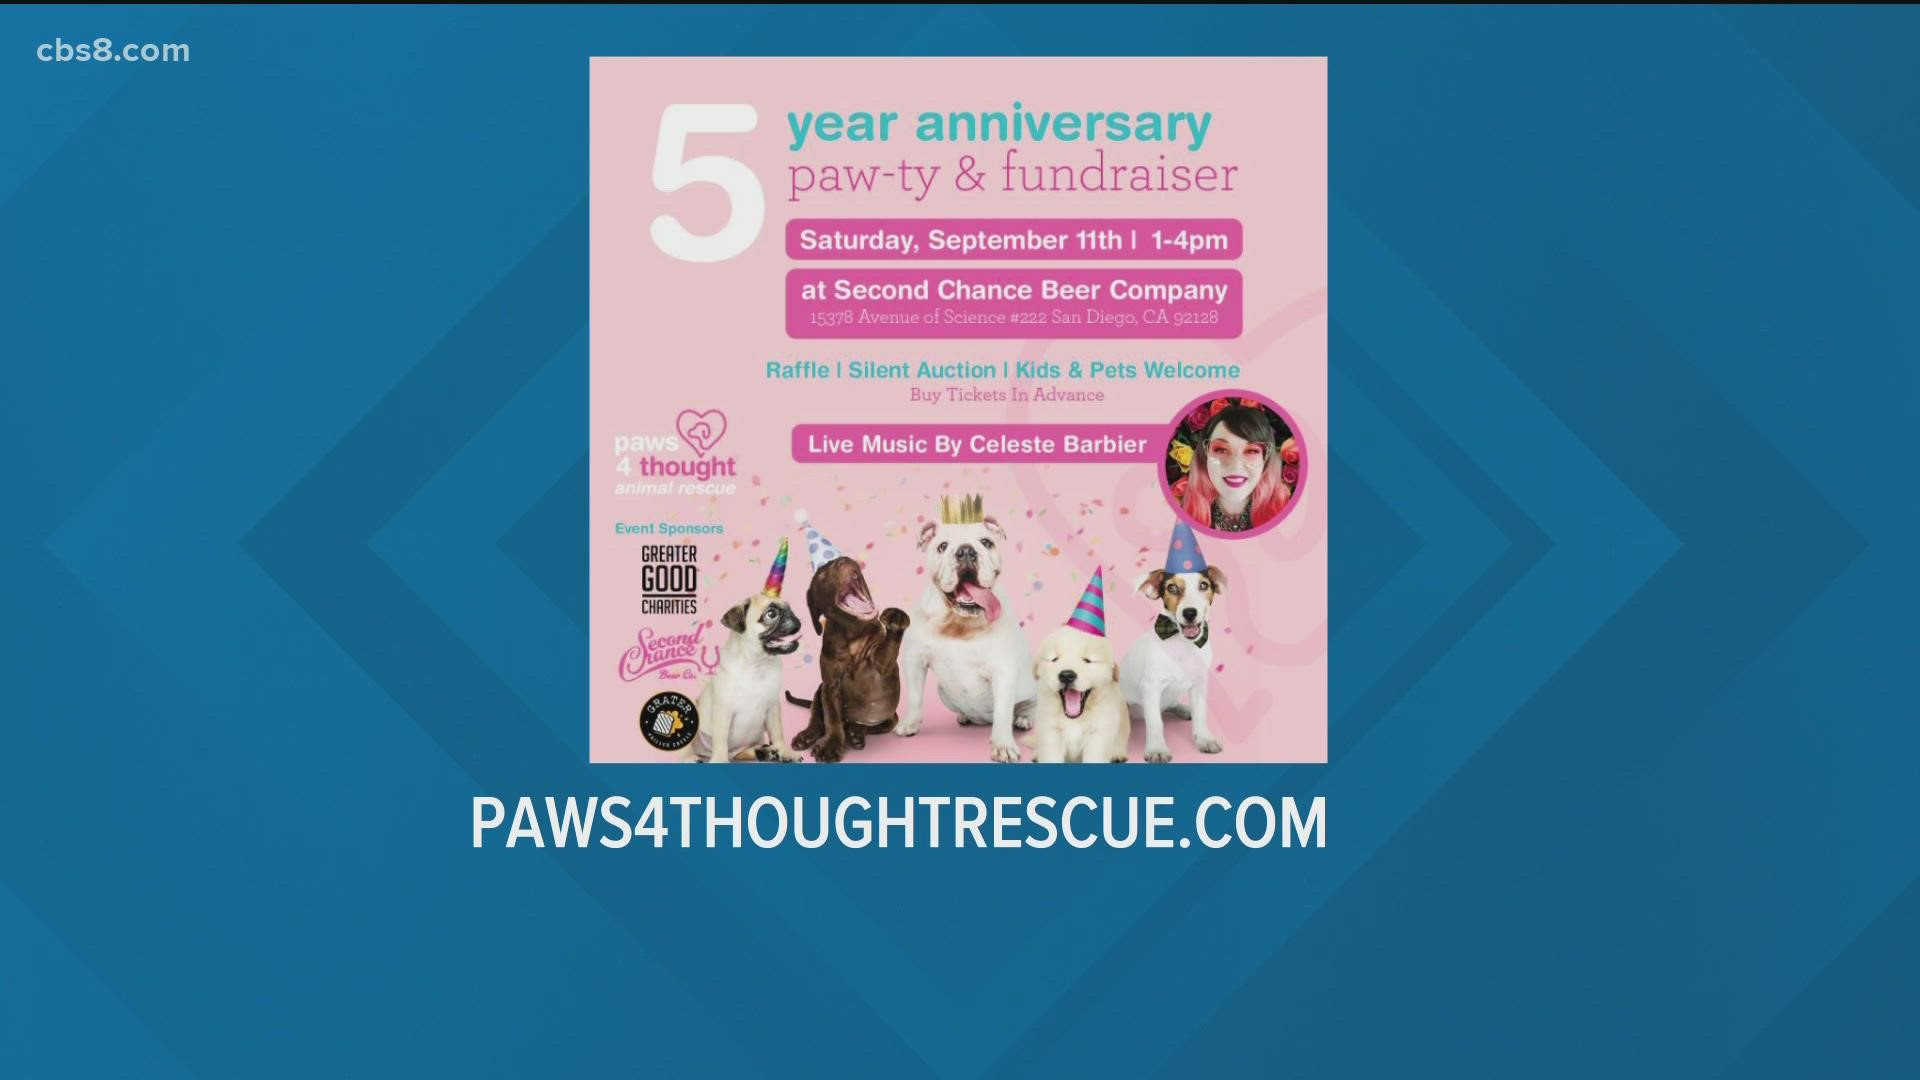 This Saturday, you can join Paws 4 Thought Animal Rescue at its anniversary paw-ty and fundraiser at Second Chance Beer Company.